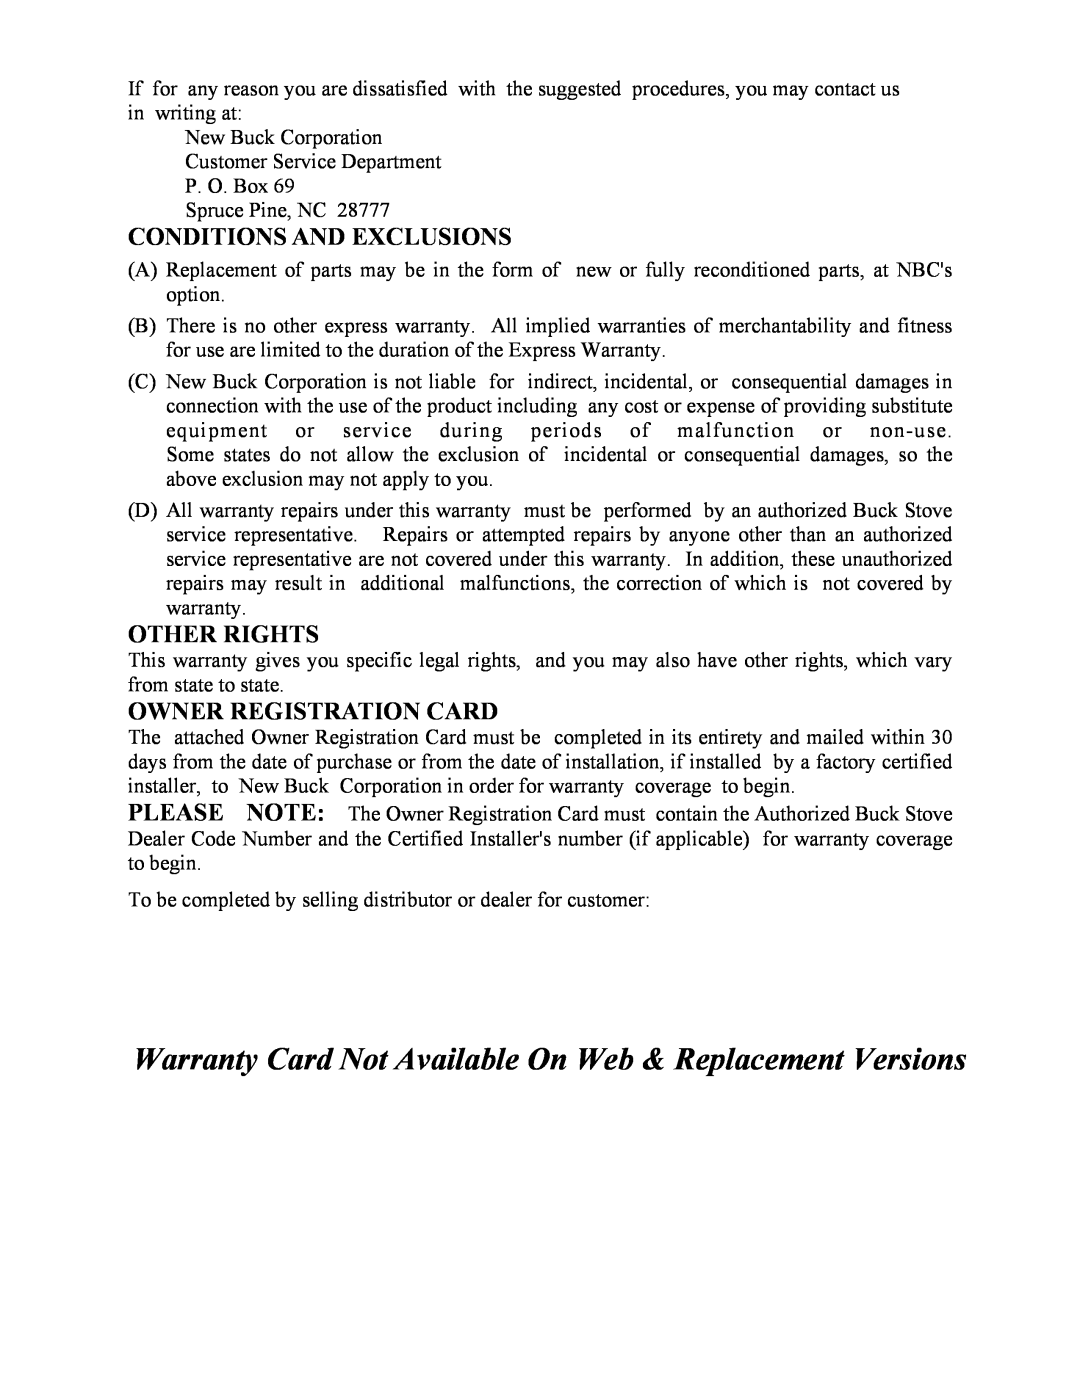 New Buck Corporation 81 installation instructions Conditions And Exclusions, Other Rights, Owner Registration Card 